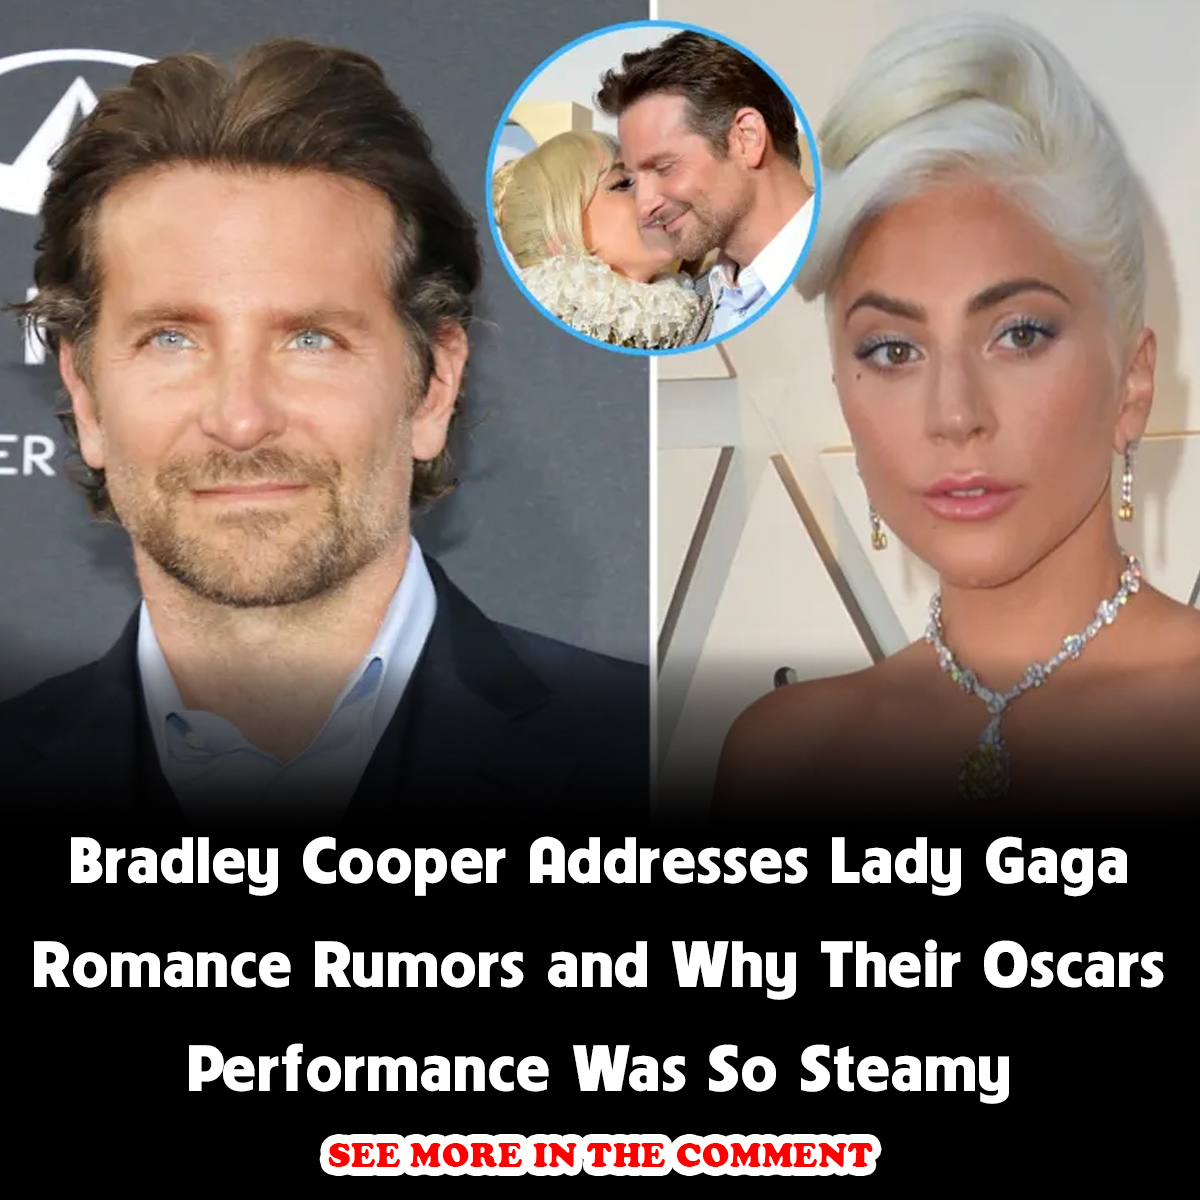 Bradley Cooper Addresses Lady Gaga Romance Rumors And Why Their Oscars Performance Was So Steamy